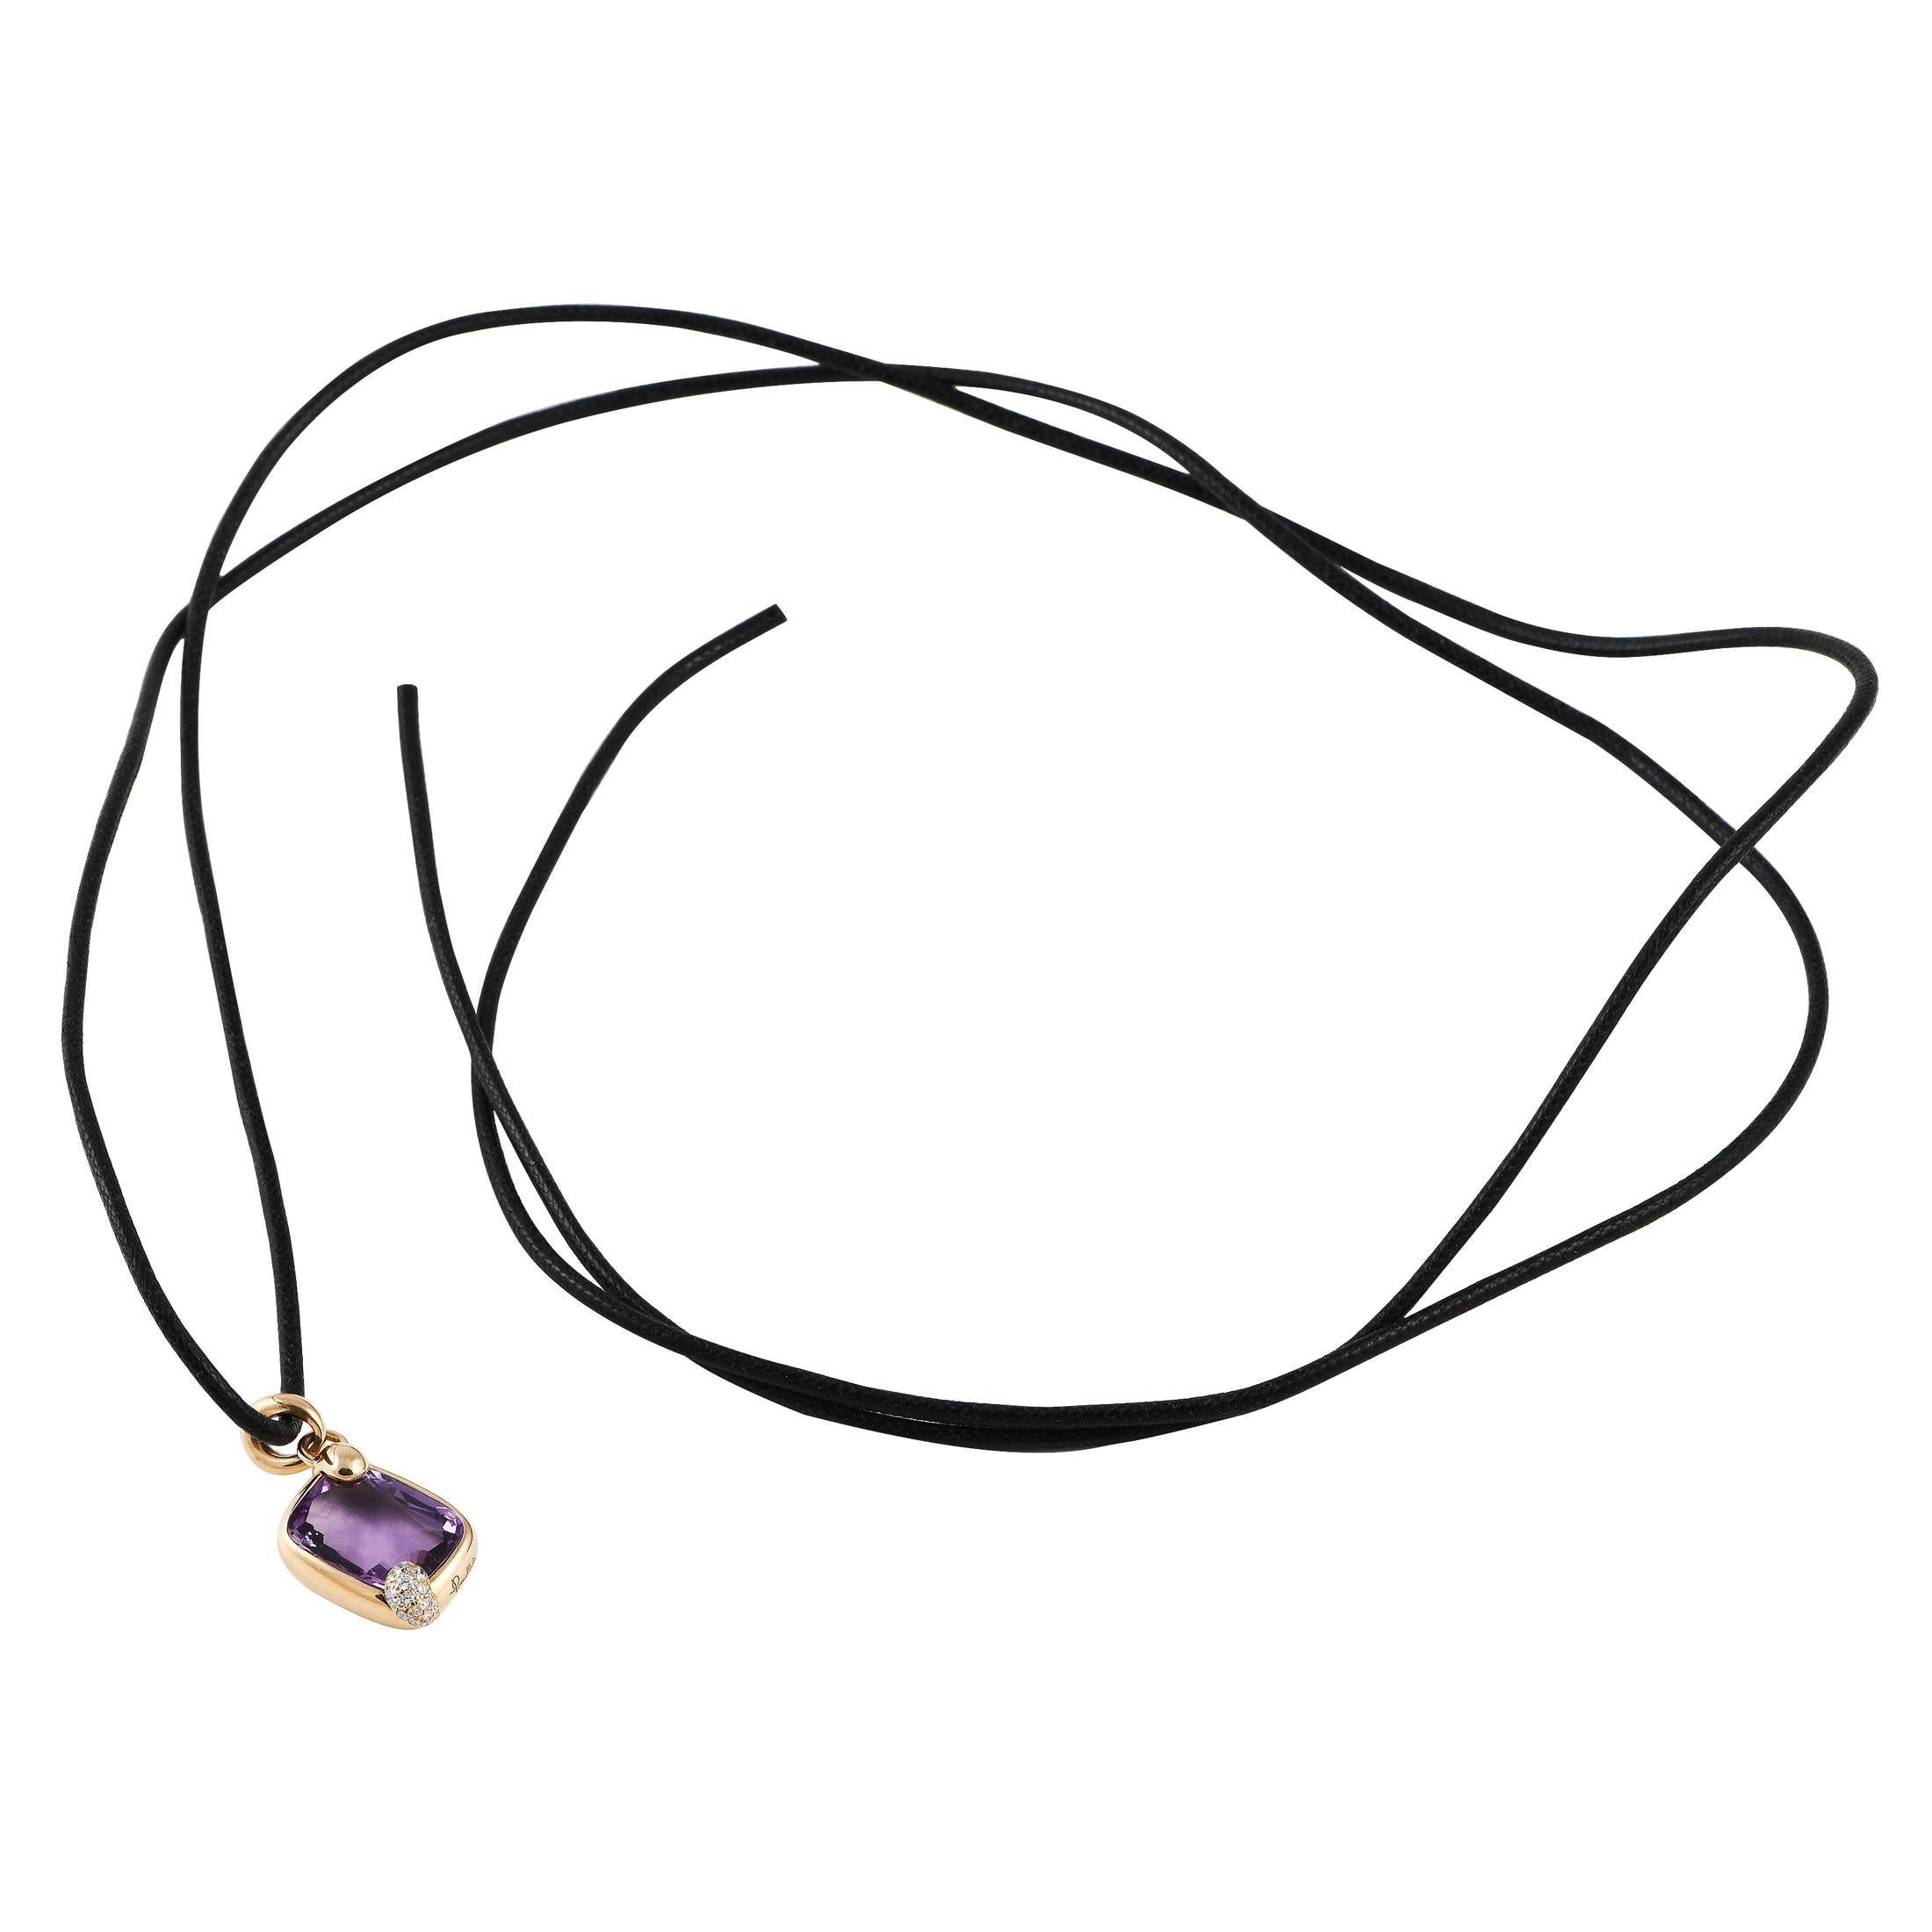 Add a graceful touch of color and sparkle to your outfit with this chic piece from Pomellato. It features a diagonally-set, rounded rectangle pendant in 18K rose gold. It is topped with a beautiful amethyst and punctuated by a petite domed dot